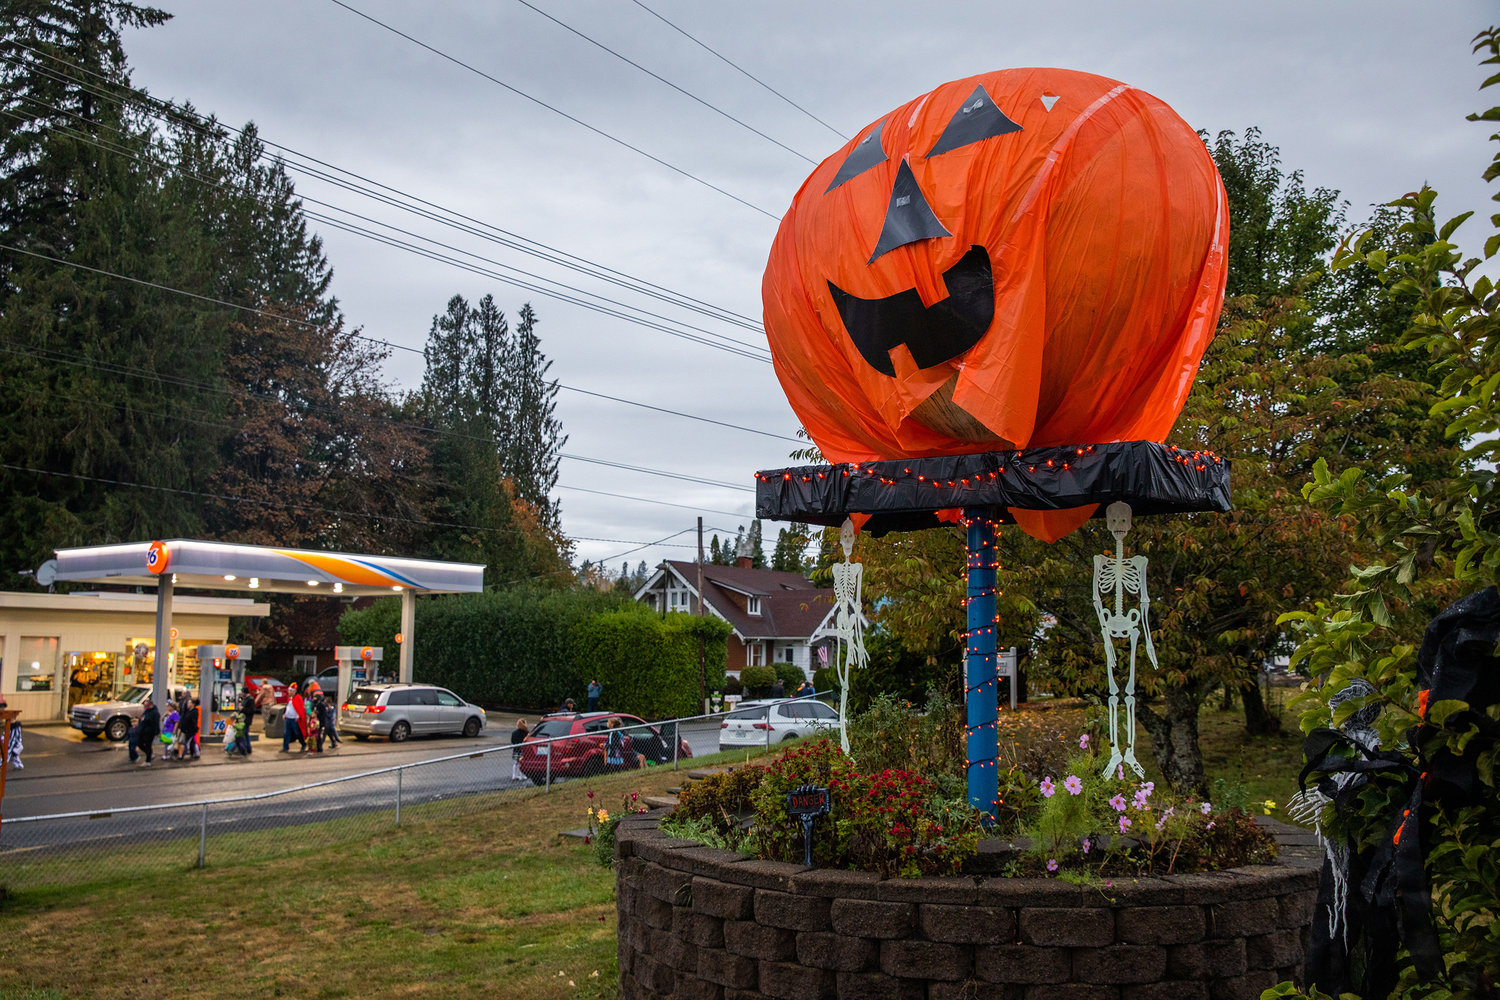 The Winlock Egg is decorated during Egg-O-Lantern festivities on Halloween.